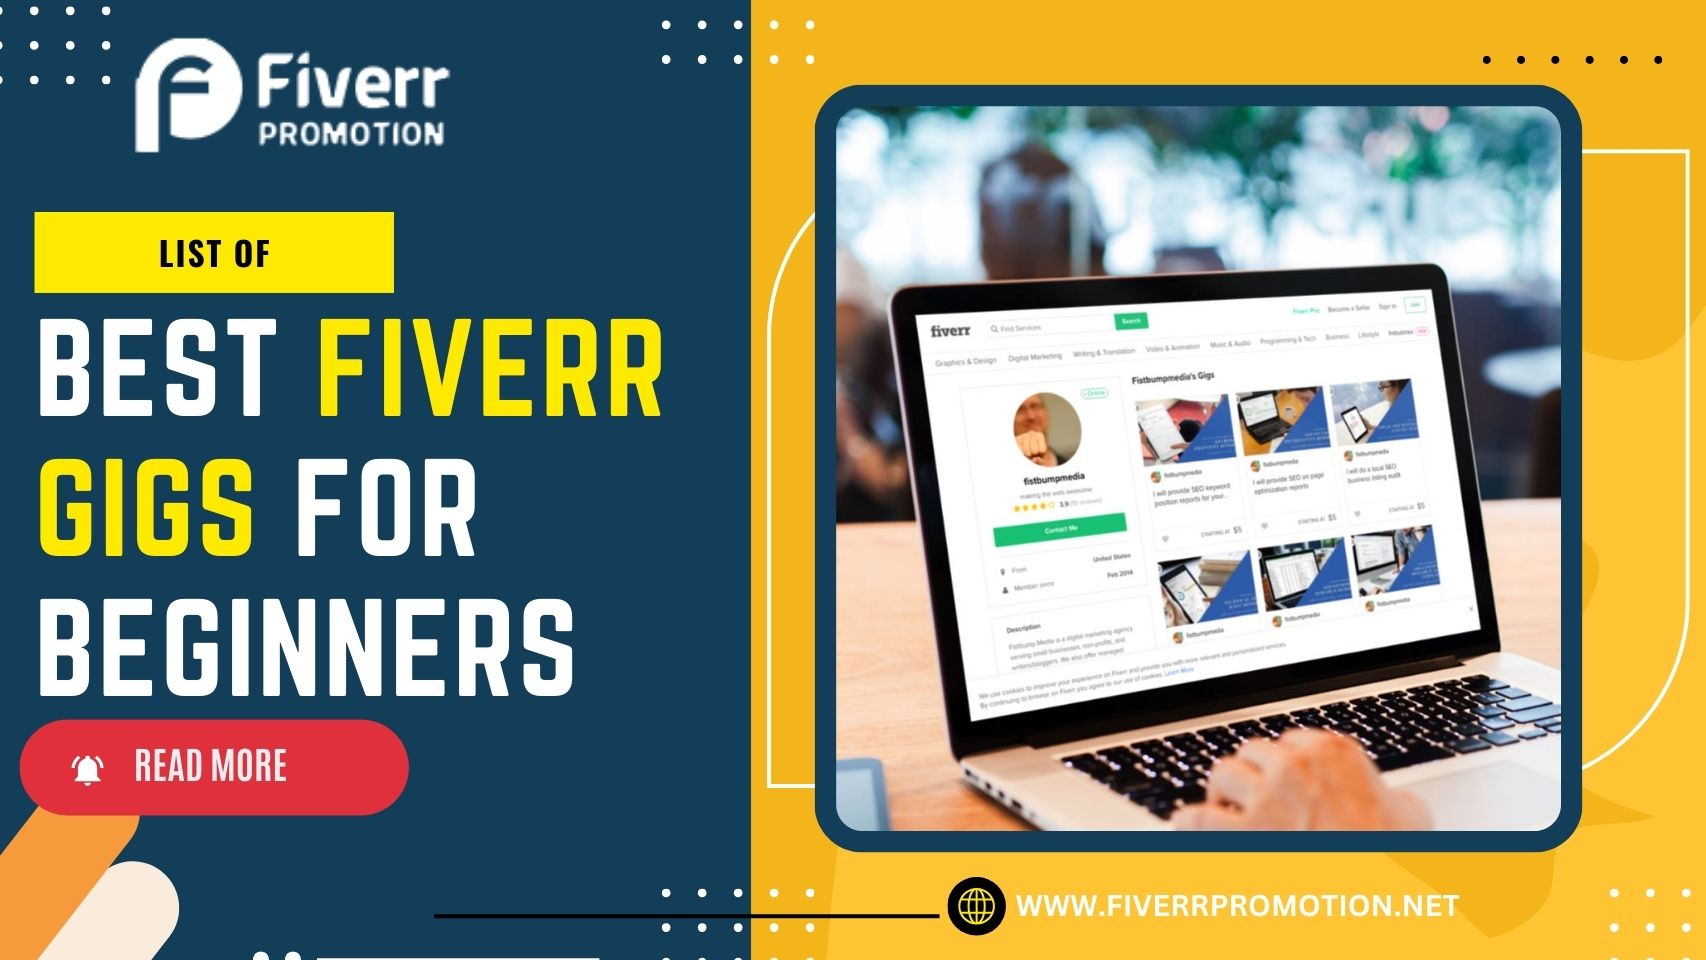    List of Best Fiverr Gigs For Beginners